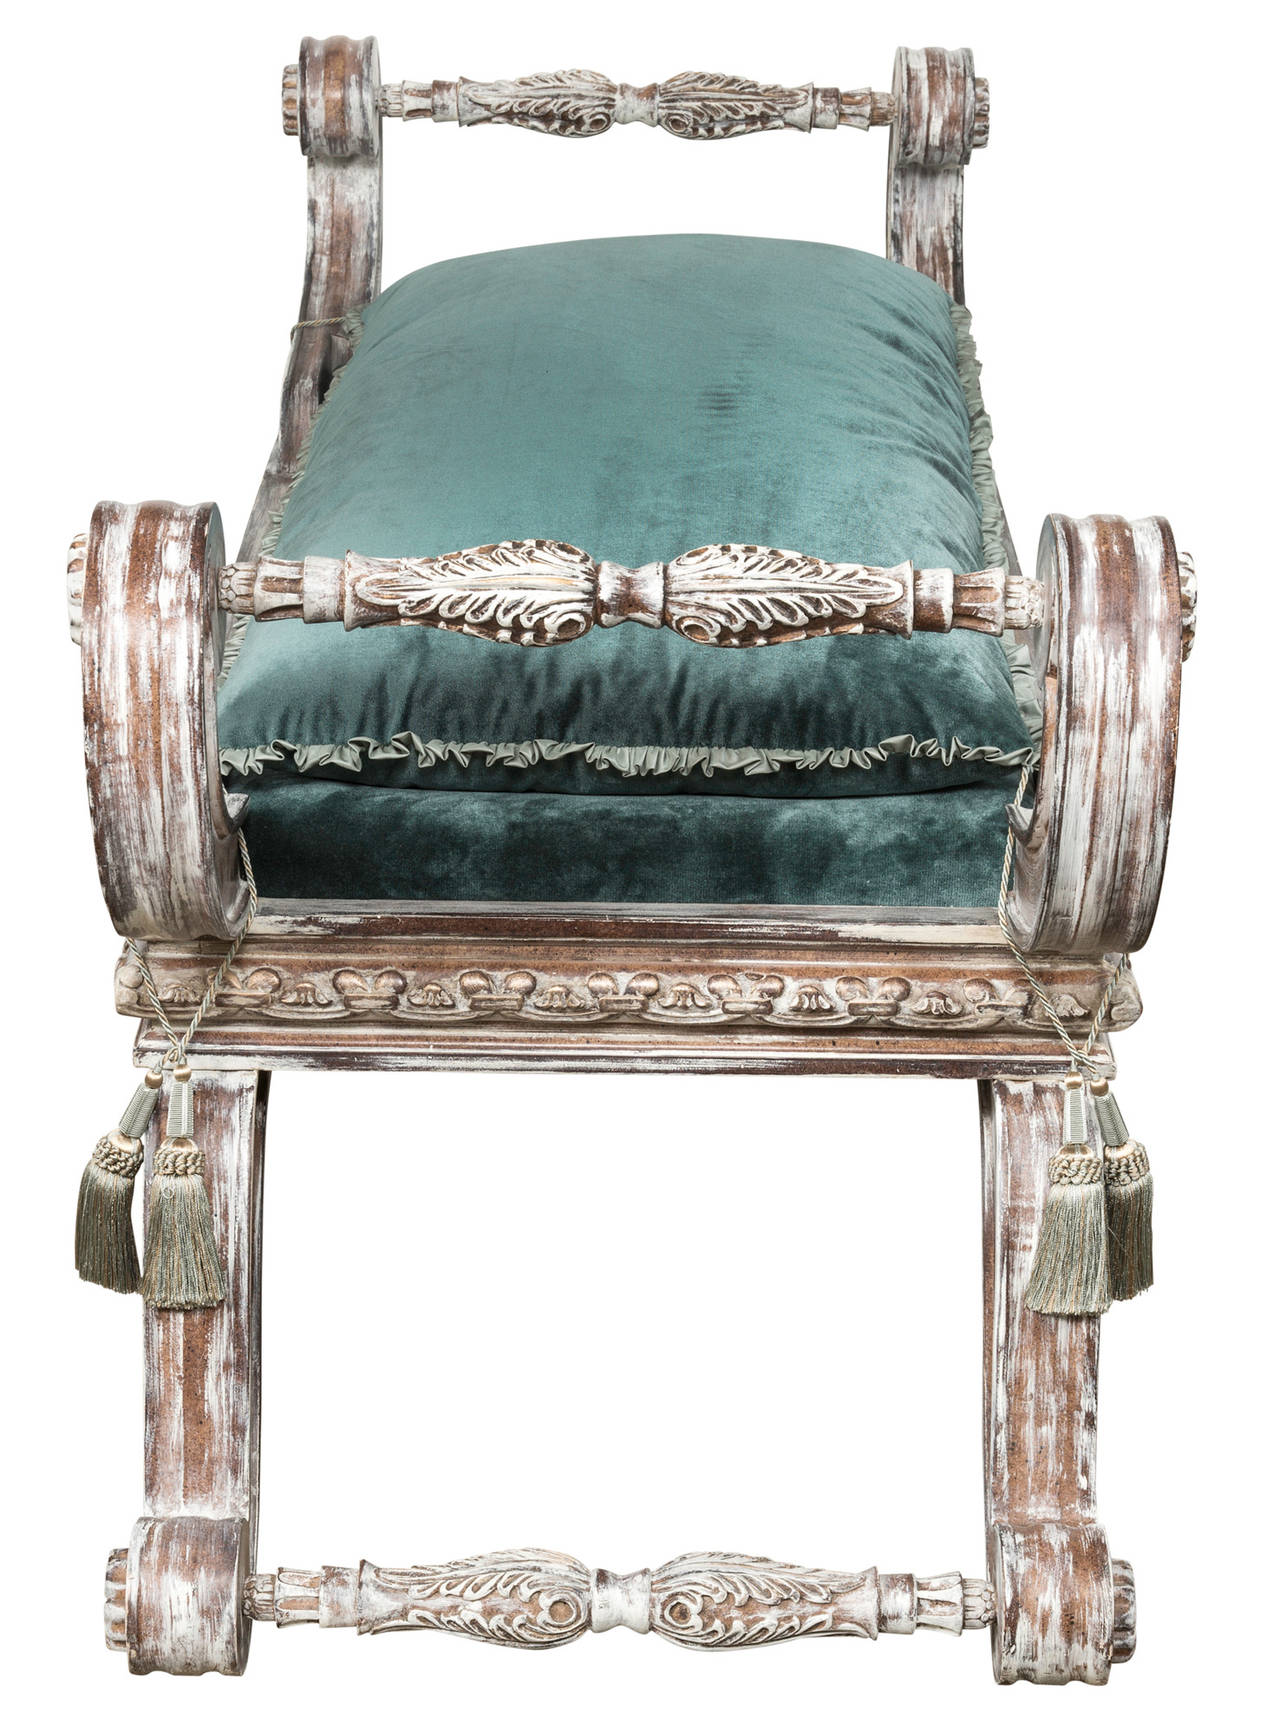 Early 20th Century Large Dramatic Italian Painted Bench, circa 1900